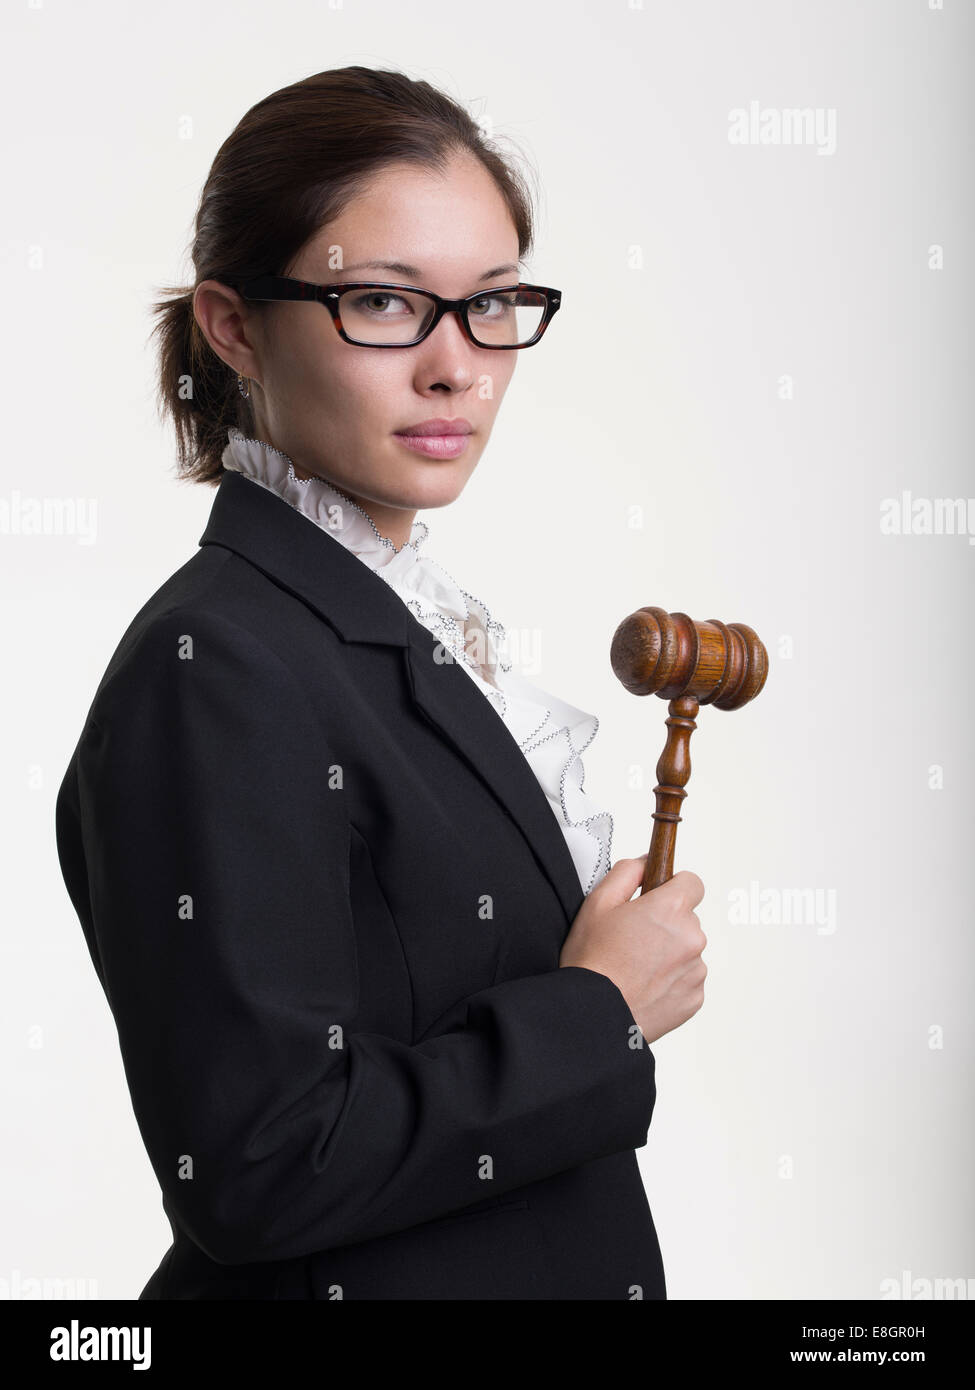 Young female lawyer / law student Stock Photo